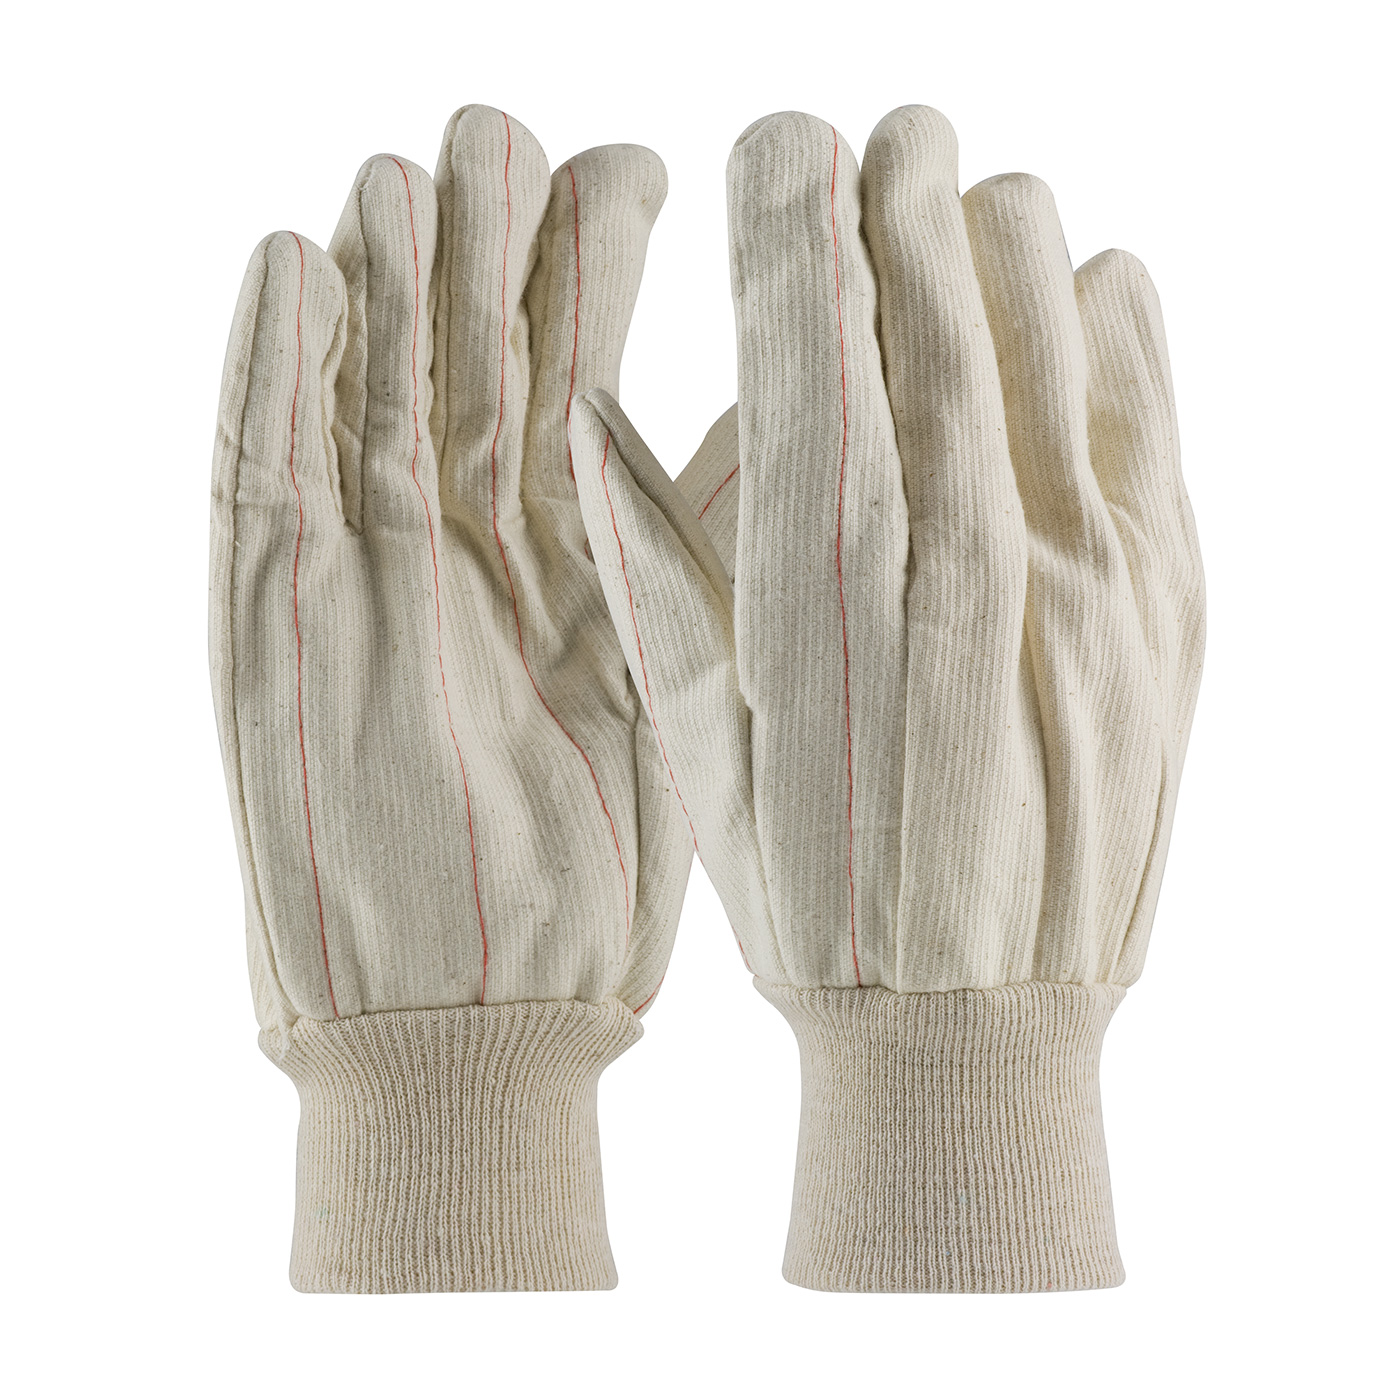 PIP Men's Natural 18oz. Nap-in Finish Double Palm Cotton/Polyester Canvas Gloves - Knit Wrist